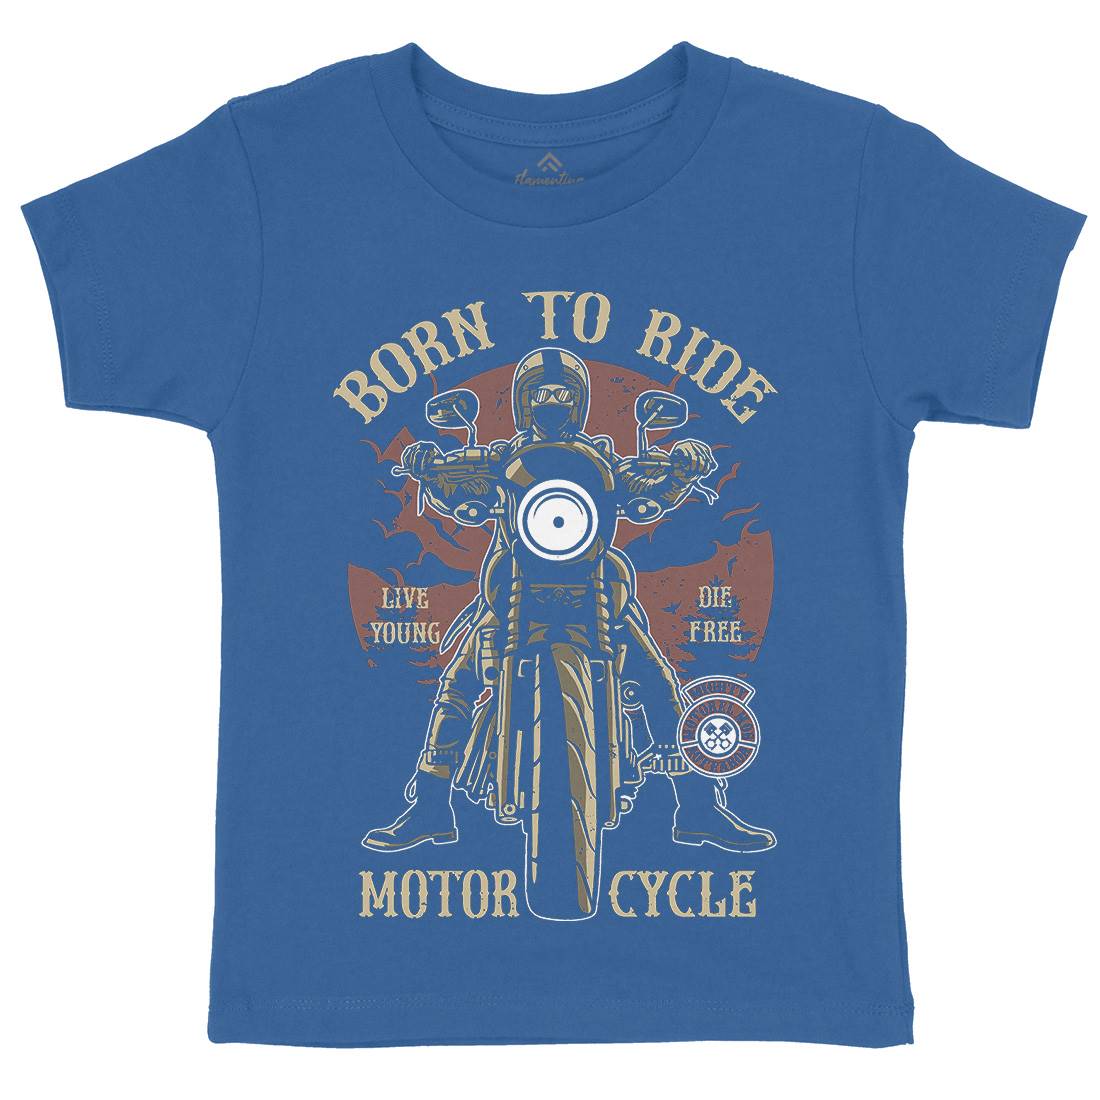 Born To Ride Kids Crew Neck T-Shirt Motorcycles A512